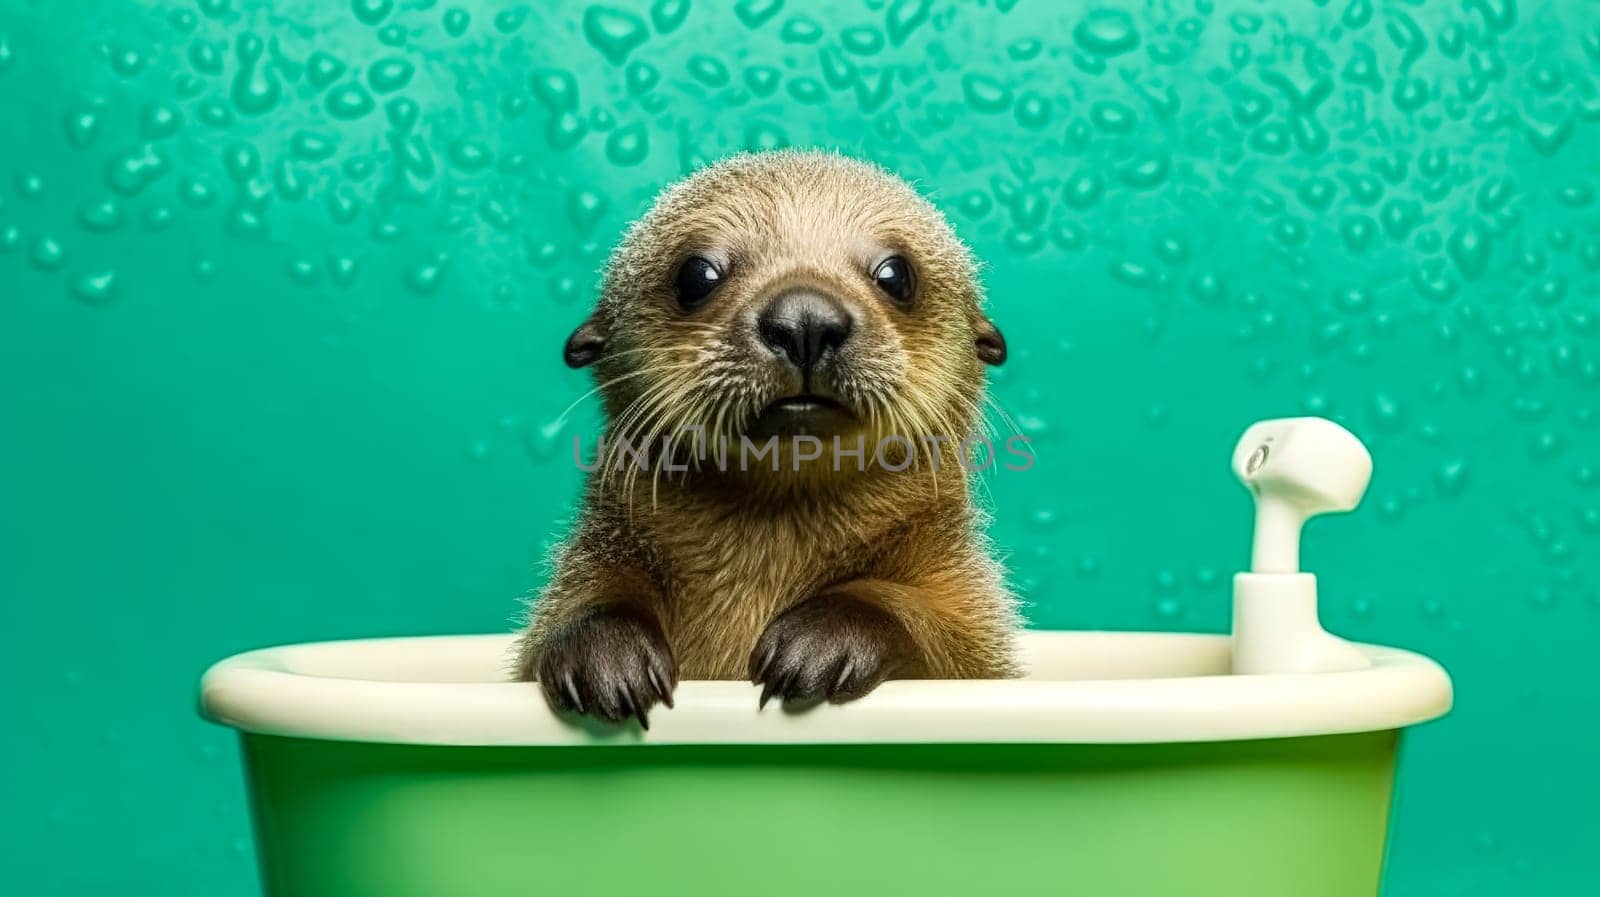 An otter in the bathroom on a green background, looking playful and curious, adding a touch of whimsy to the scene with its charming presence.